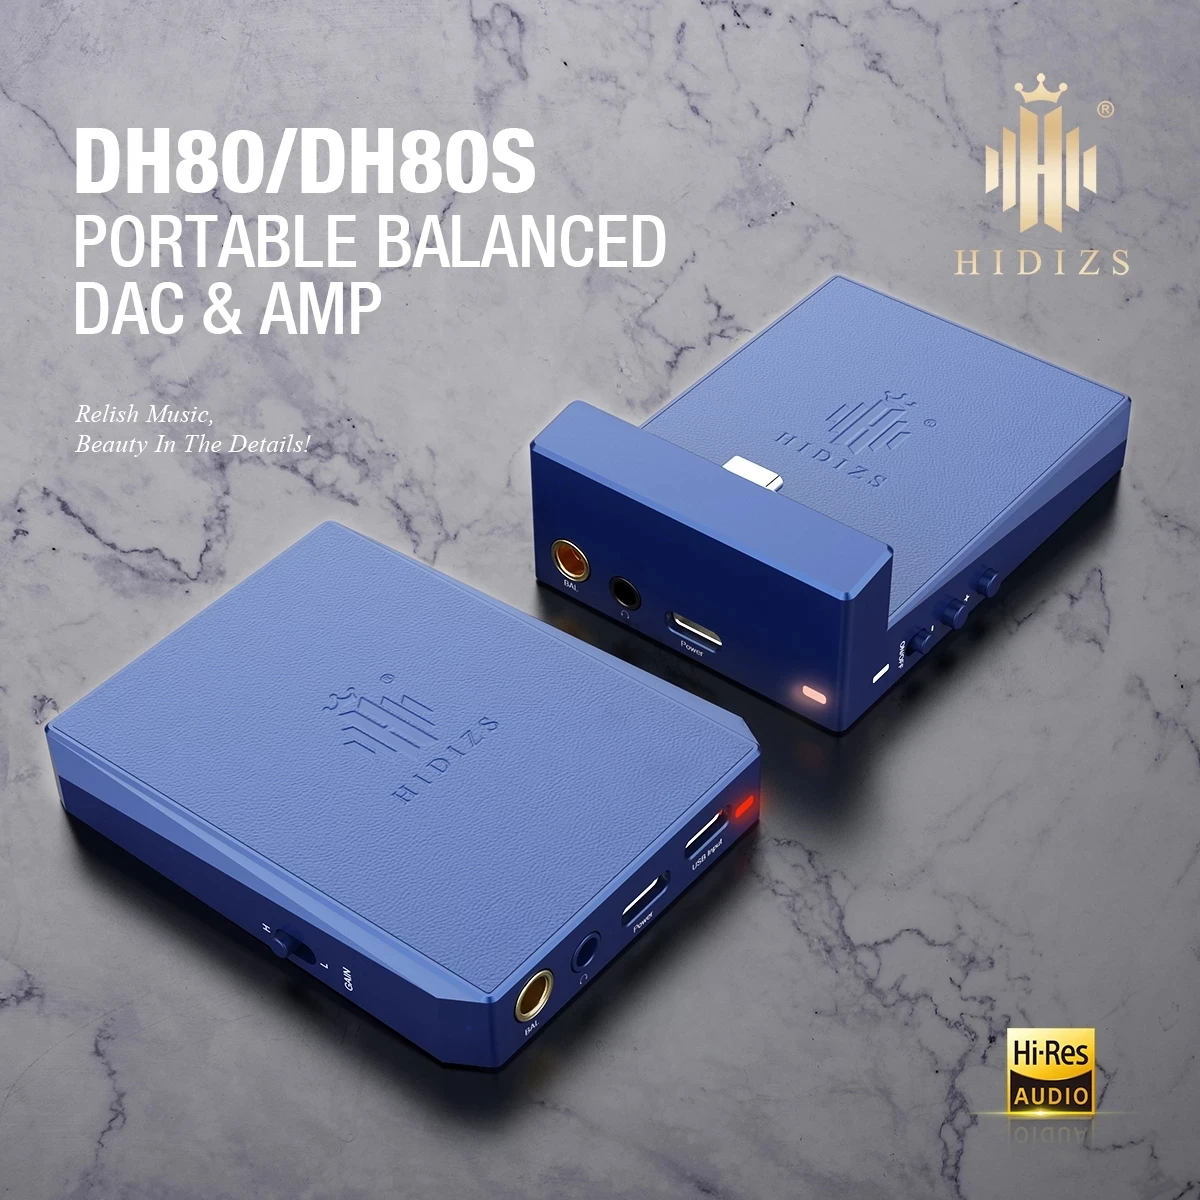 

Hidizs DH80 DH80S ESS9281C PRO Chip Portable Balanced DAC AMP Headphone Amplifier Support MQA DSD128 3.5+4.4mm Output vs ibasso